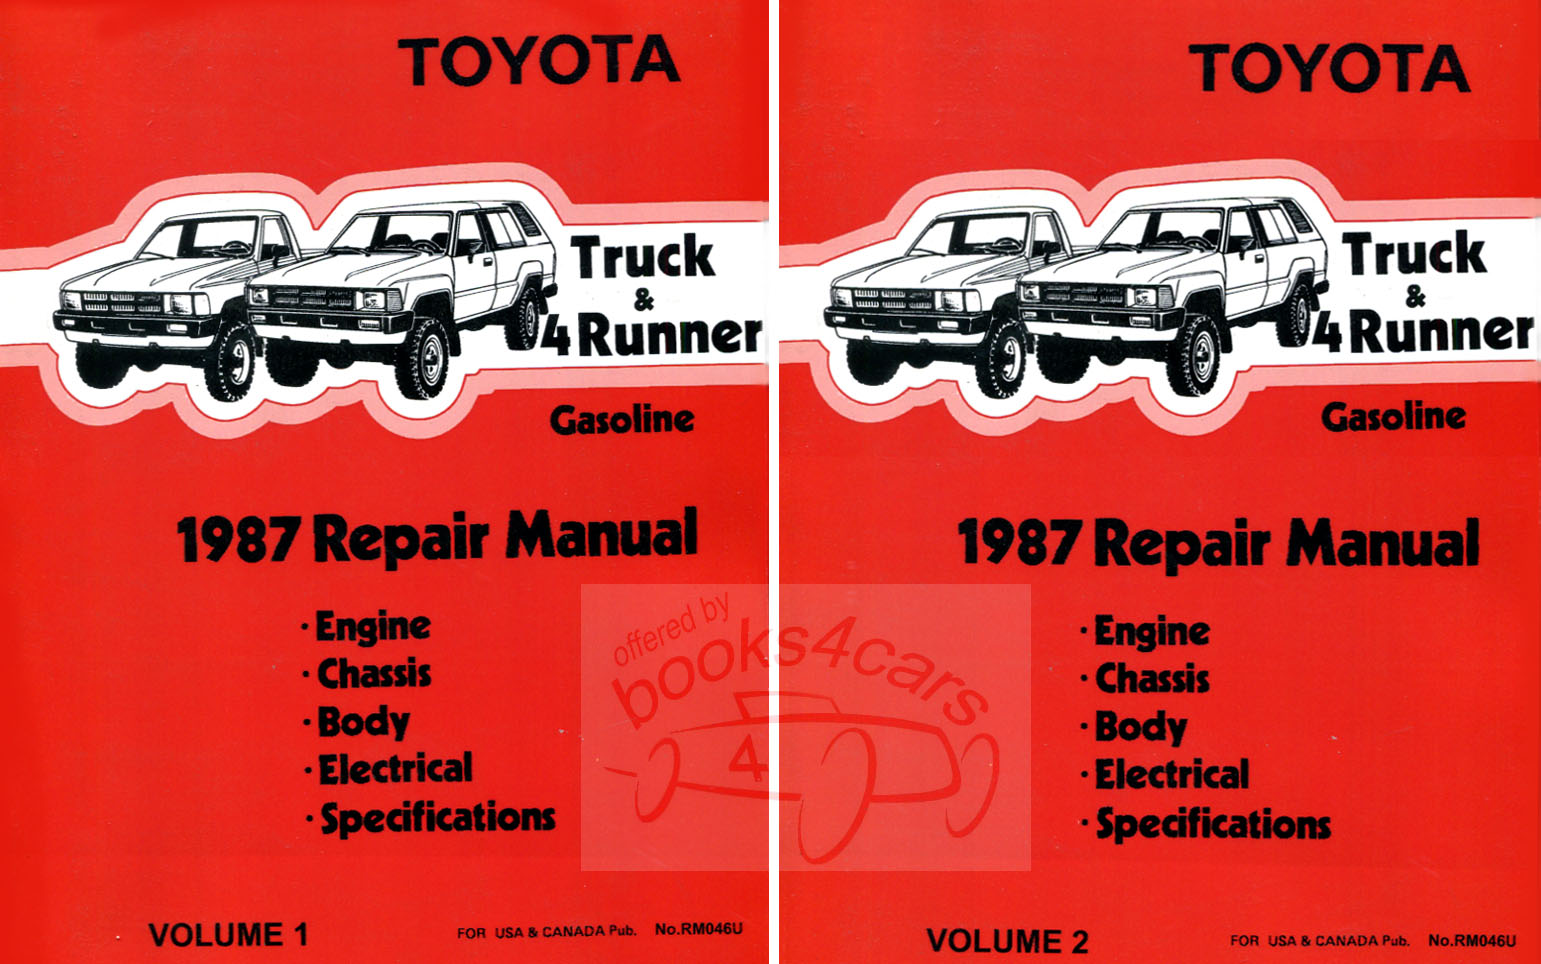 87 Truck & 4Runner Shop Service Repair Manual by Toyota includes 4x4 & Turbo